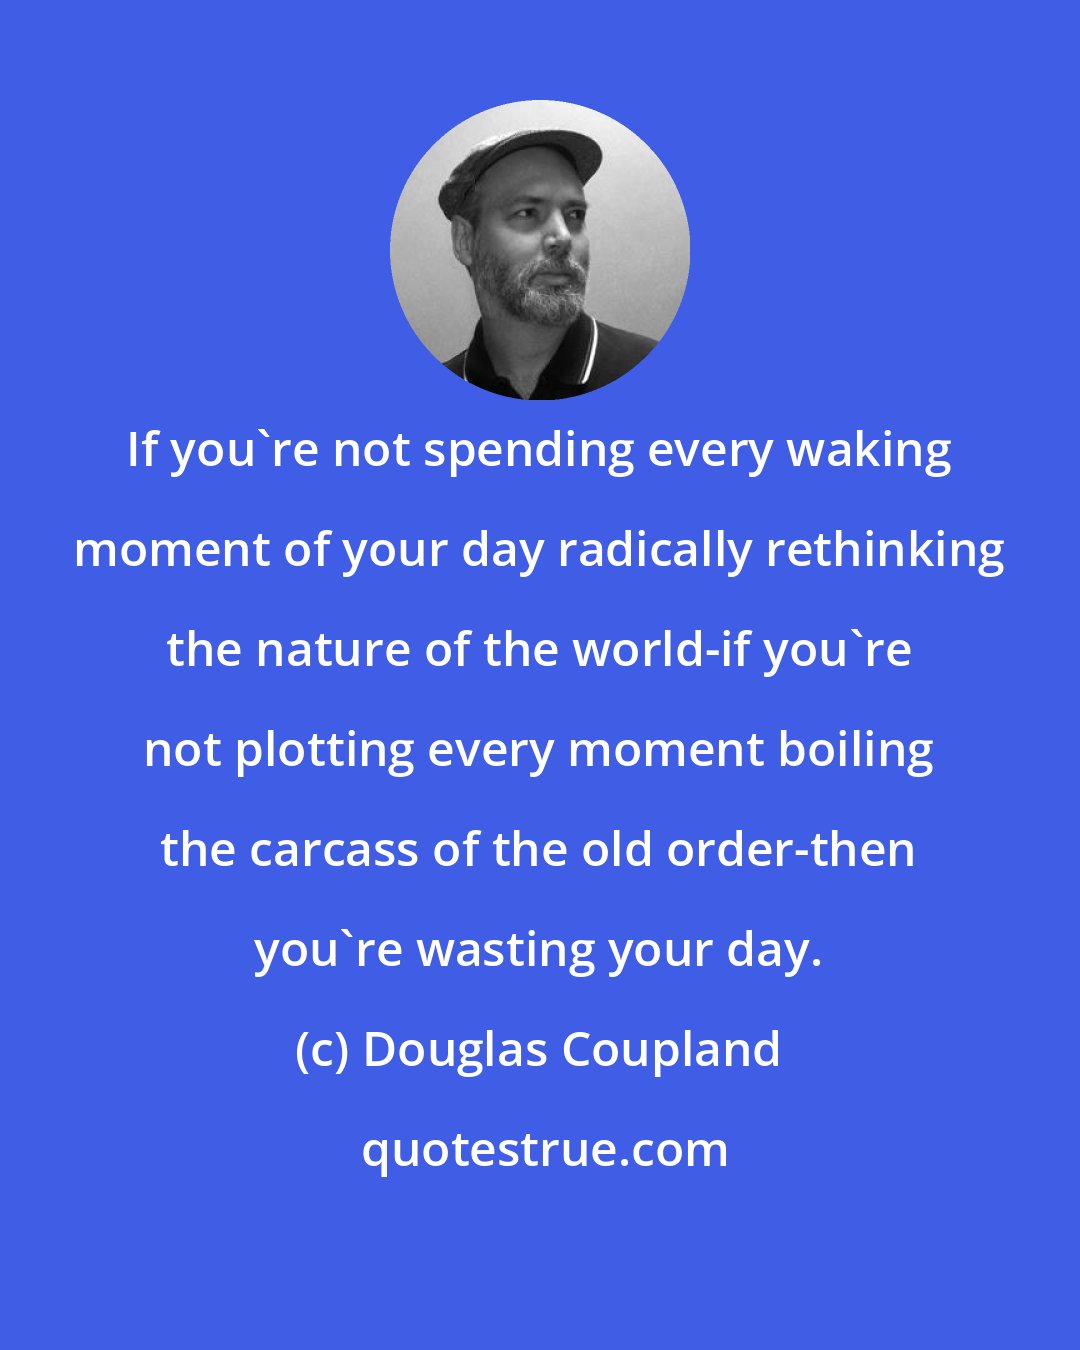 Douglas Coupland: If you're not spending every waking moment of your day radically rethinking the nature of the world-if you're not plotting every moment boiling the carcass of the old order-then you're wasting your day.